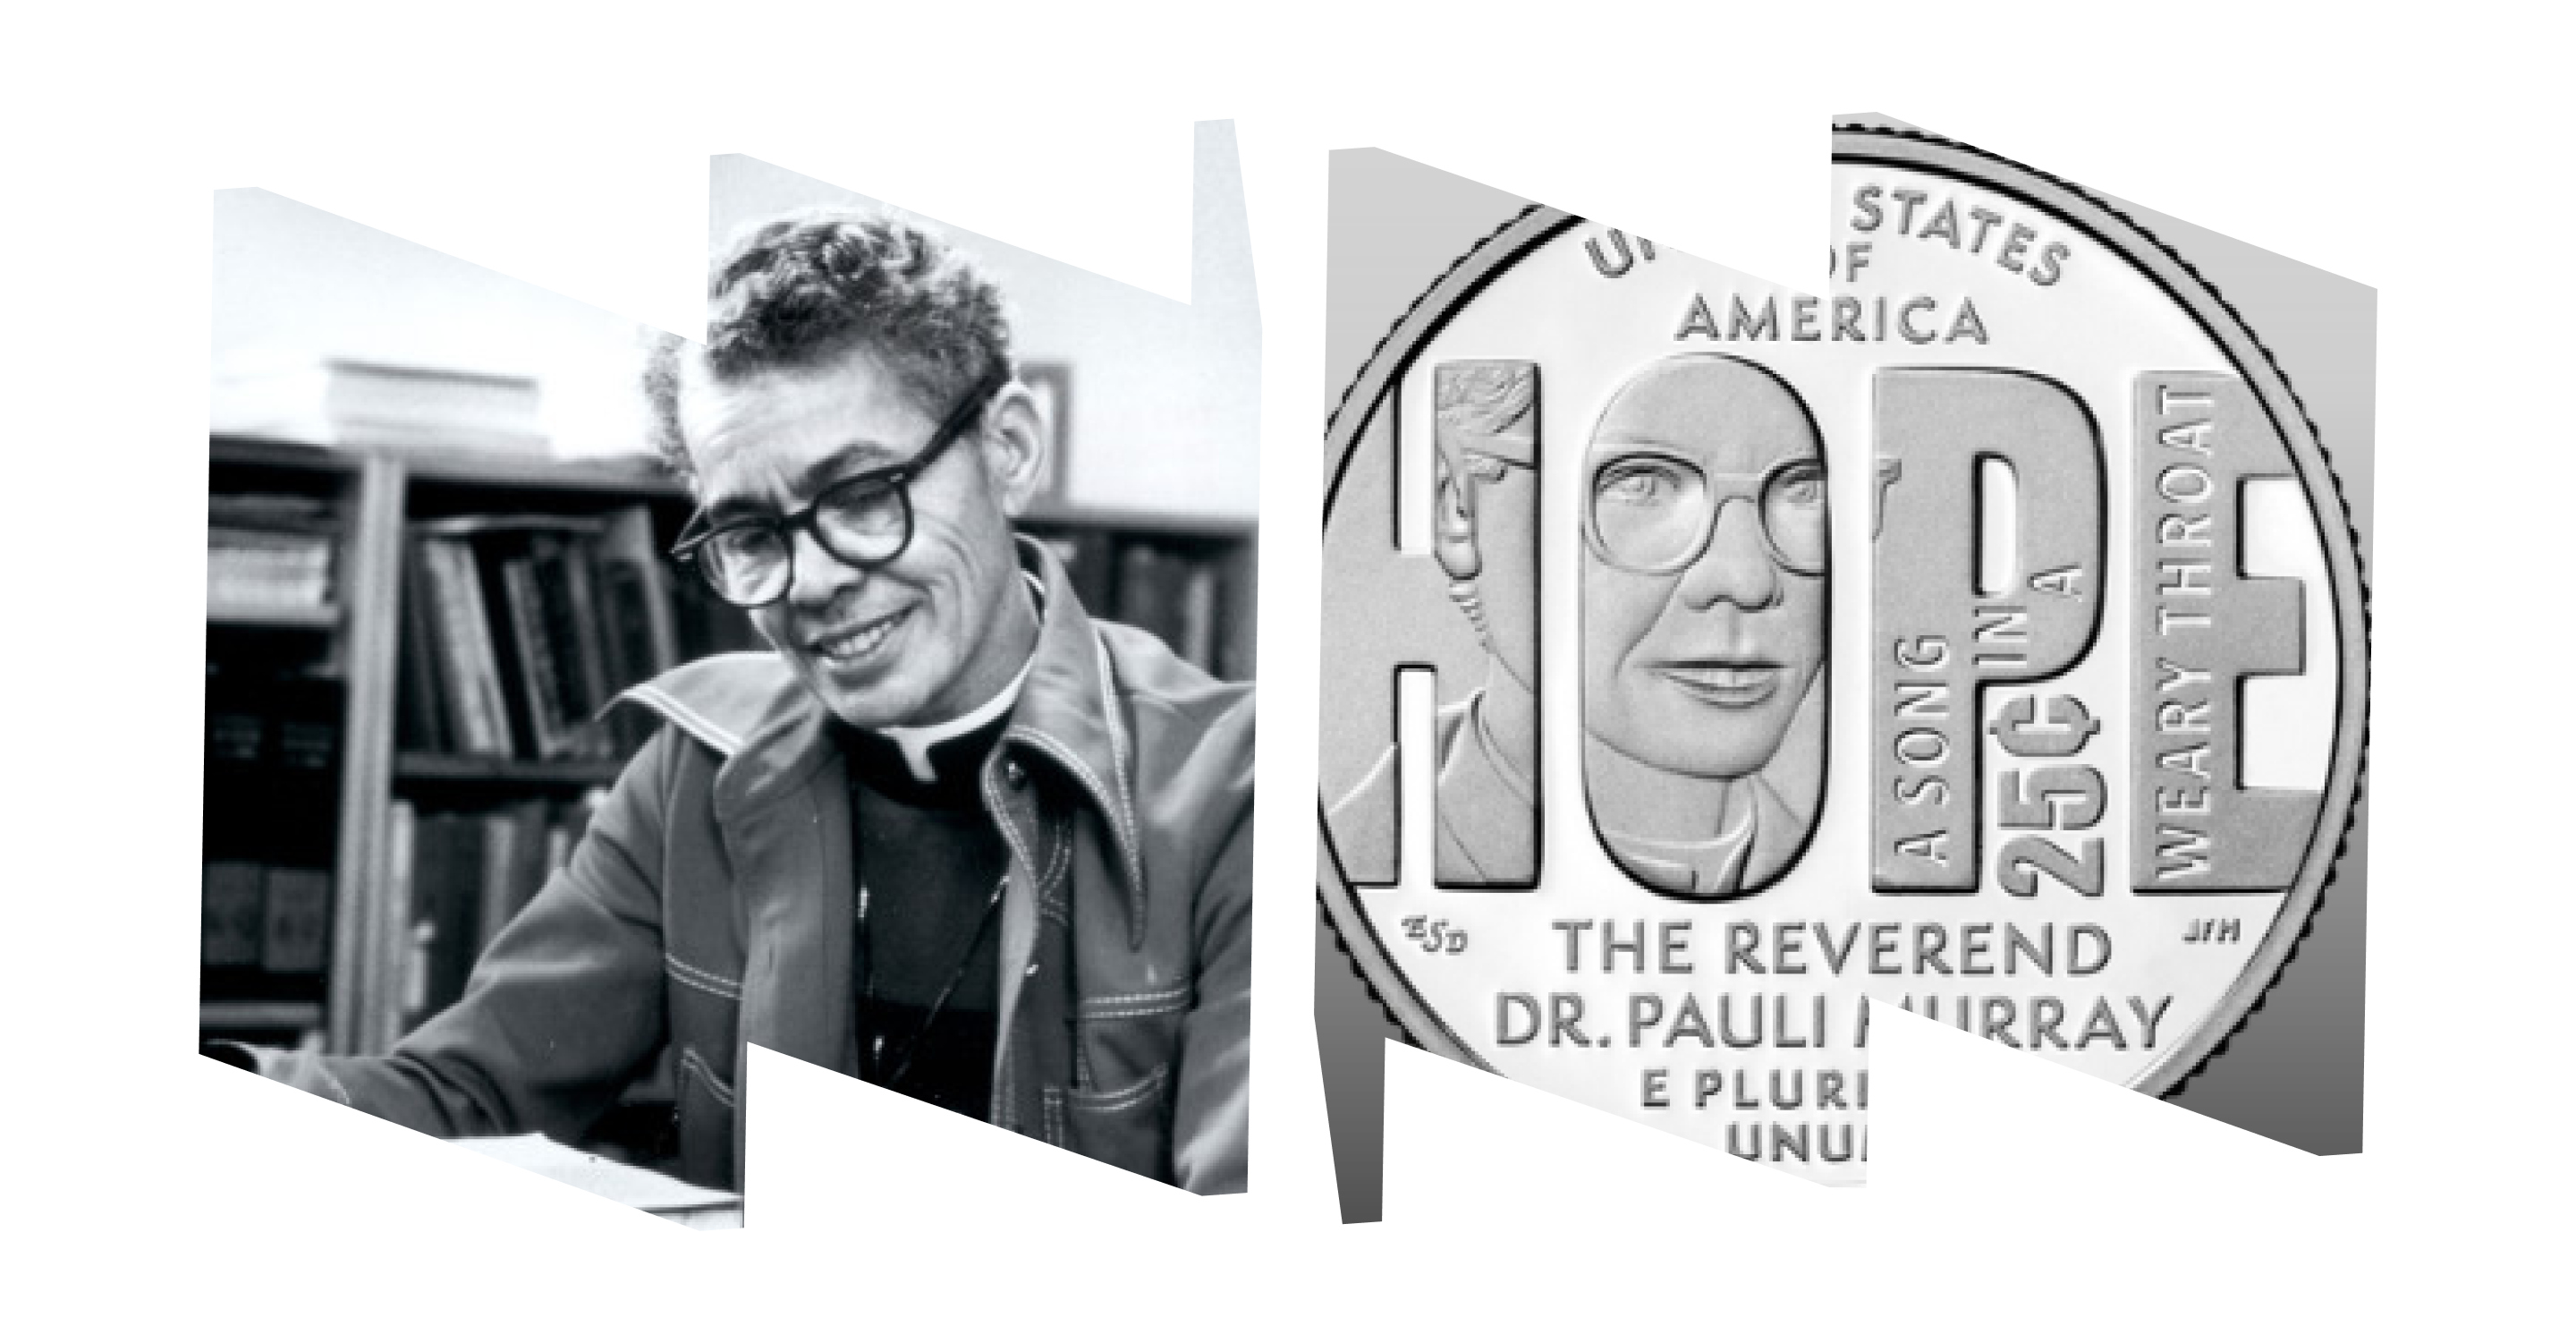 In left "W" frame, a black and white image of Pauli Murray seated and writing; in right "M" frame, close-up image of the Pauli Murray quarter.